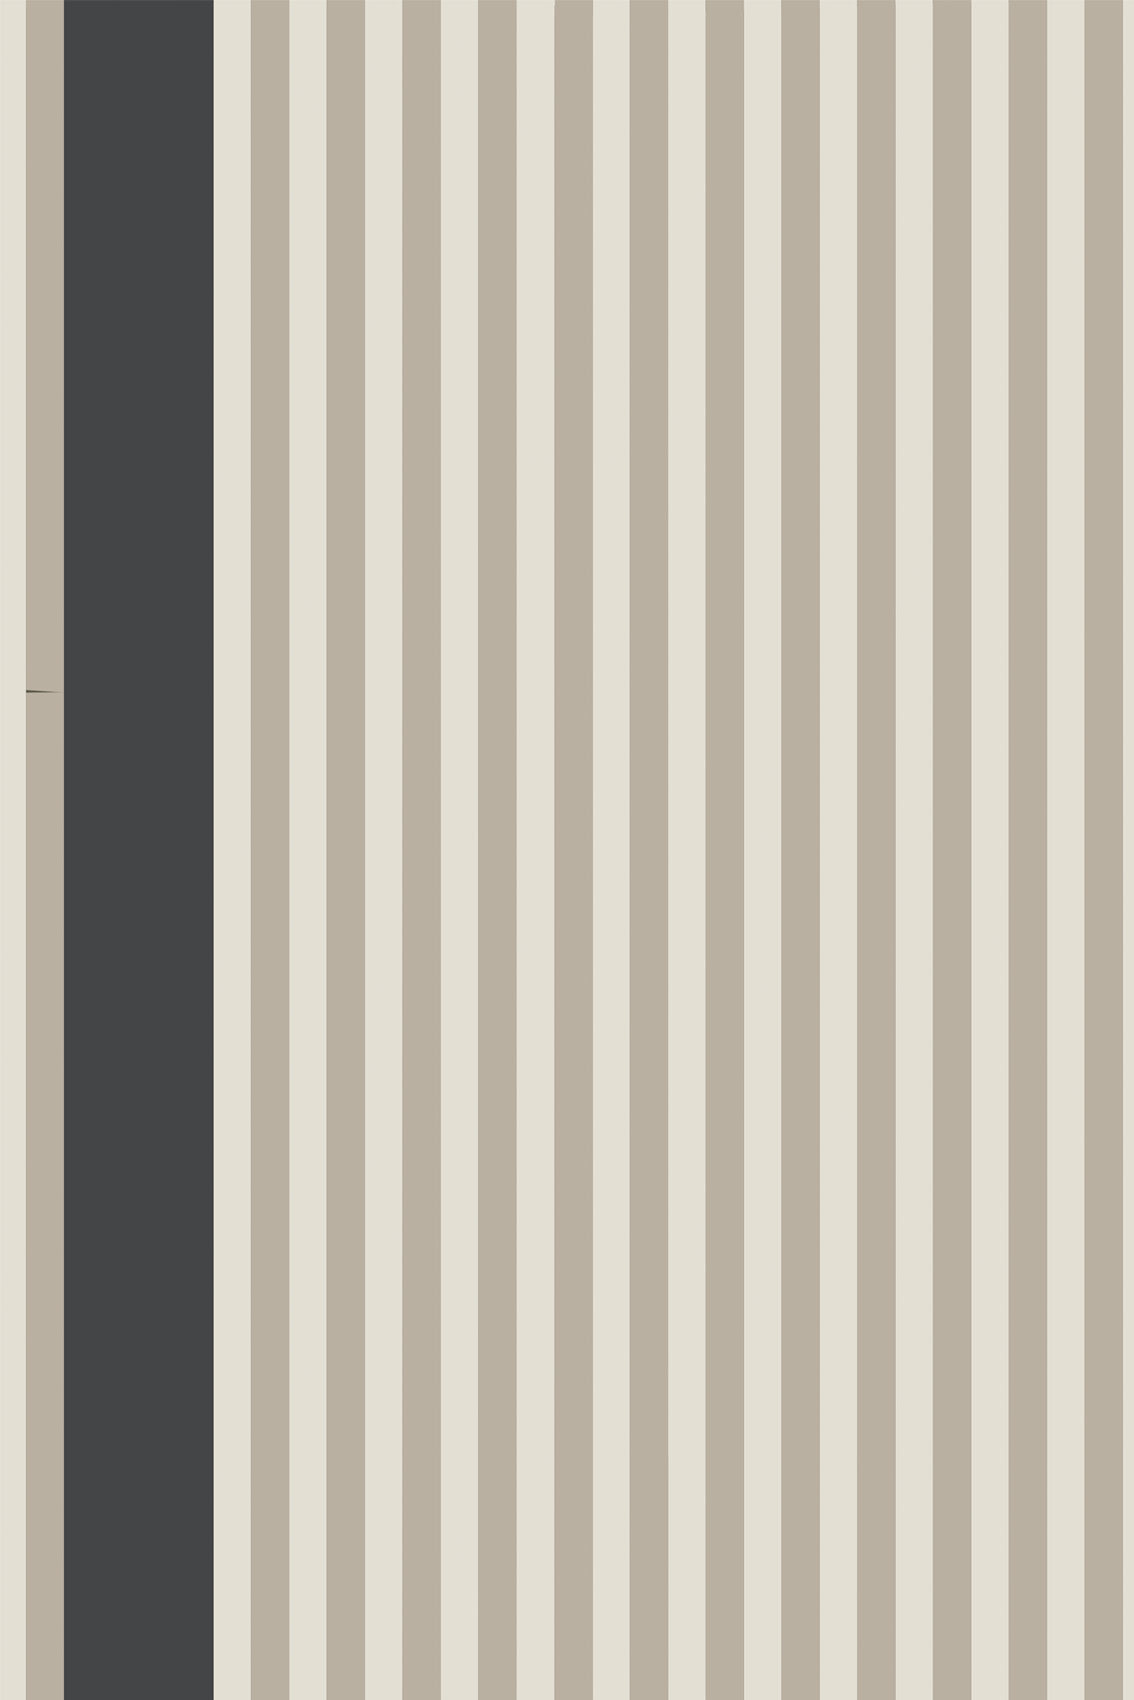 Load image into Gallery viewer, Farrow and Ball Wallpaper Carte Blanche: Stripe BP 6104
